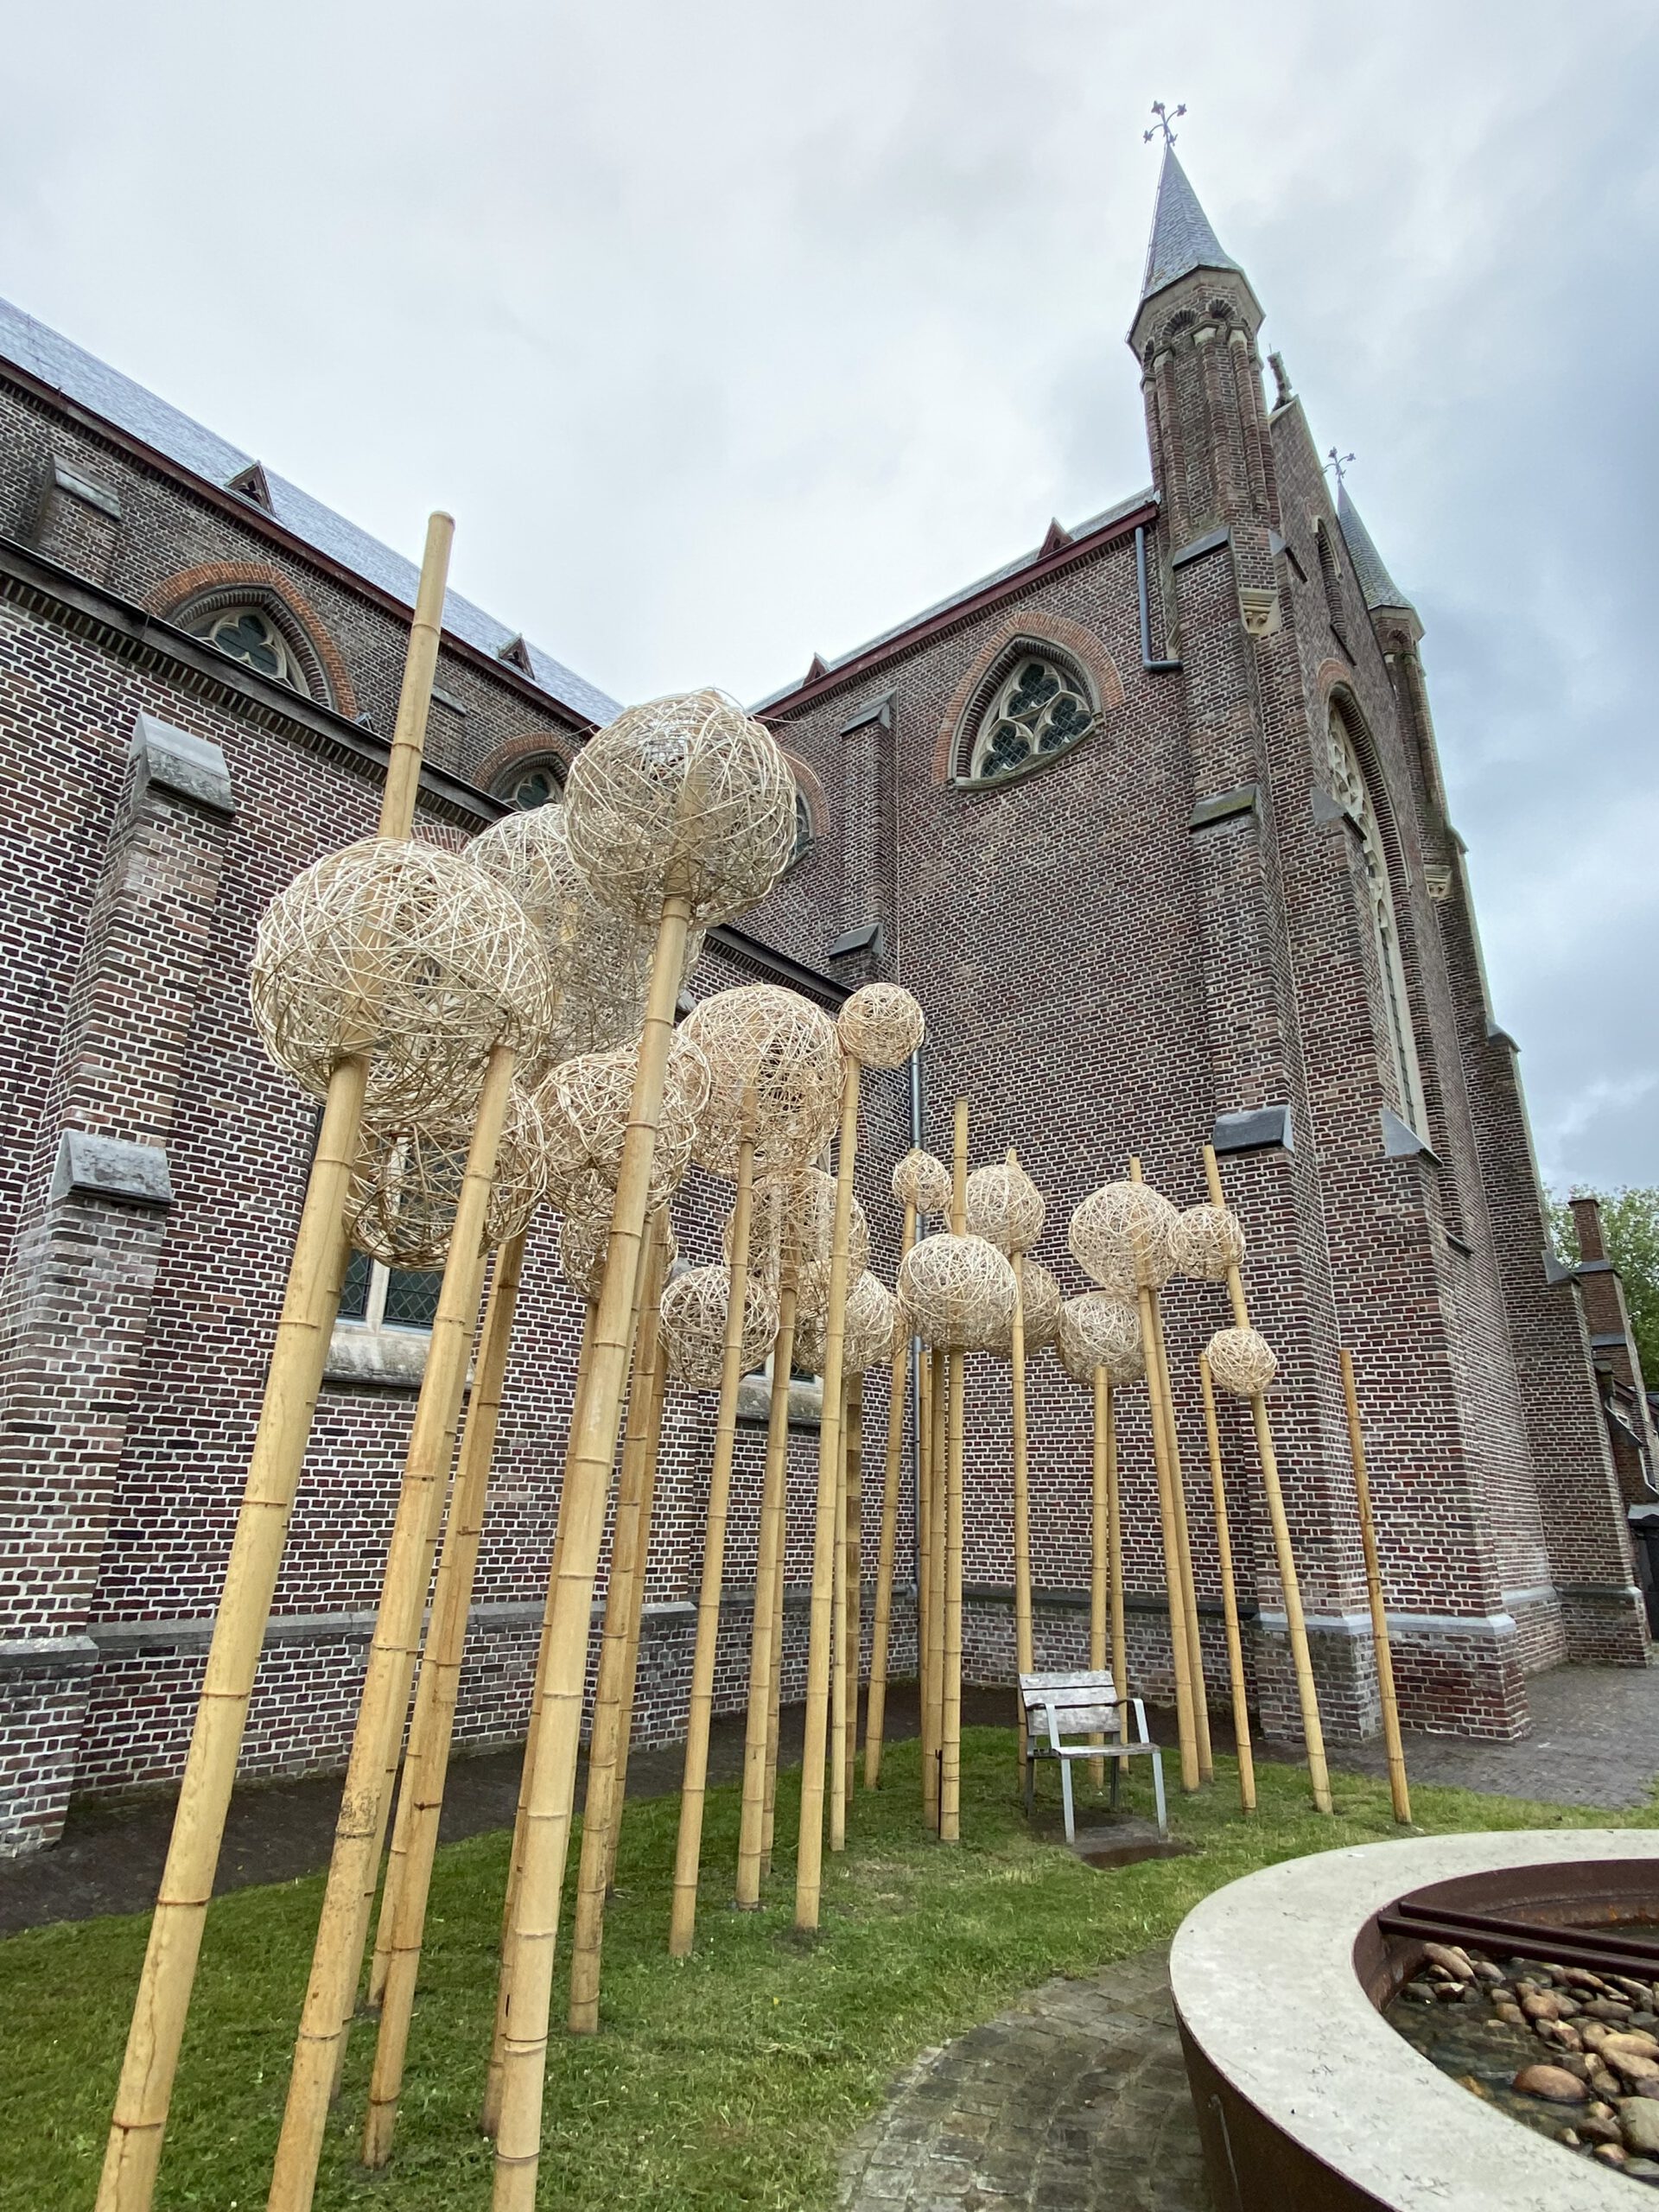 A FANTASTIC LAND-ART PROJECT BY GEERT PATTYN IN THE COAST AREA OF FLANDERS - the cathedral - An Theunynck blog on thursd